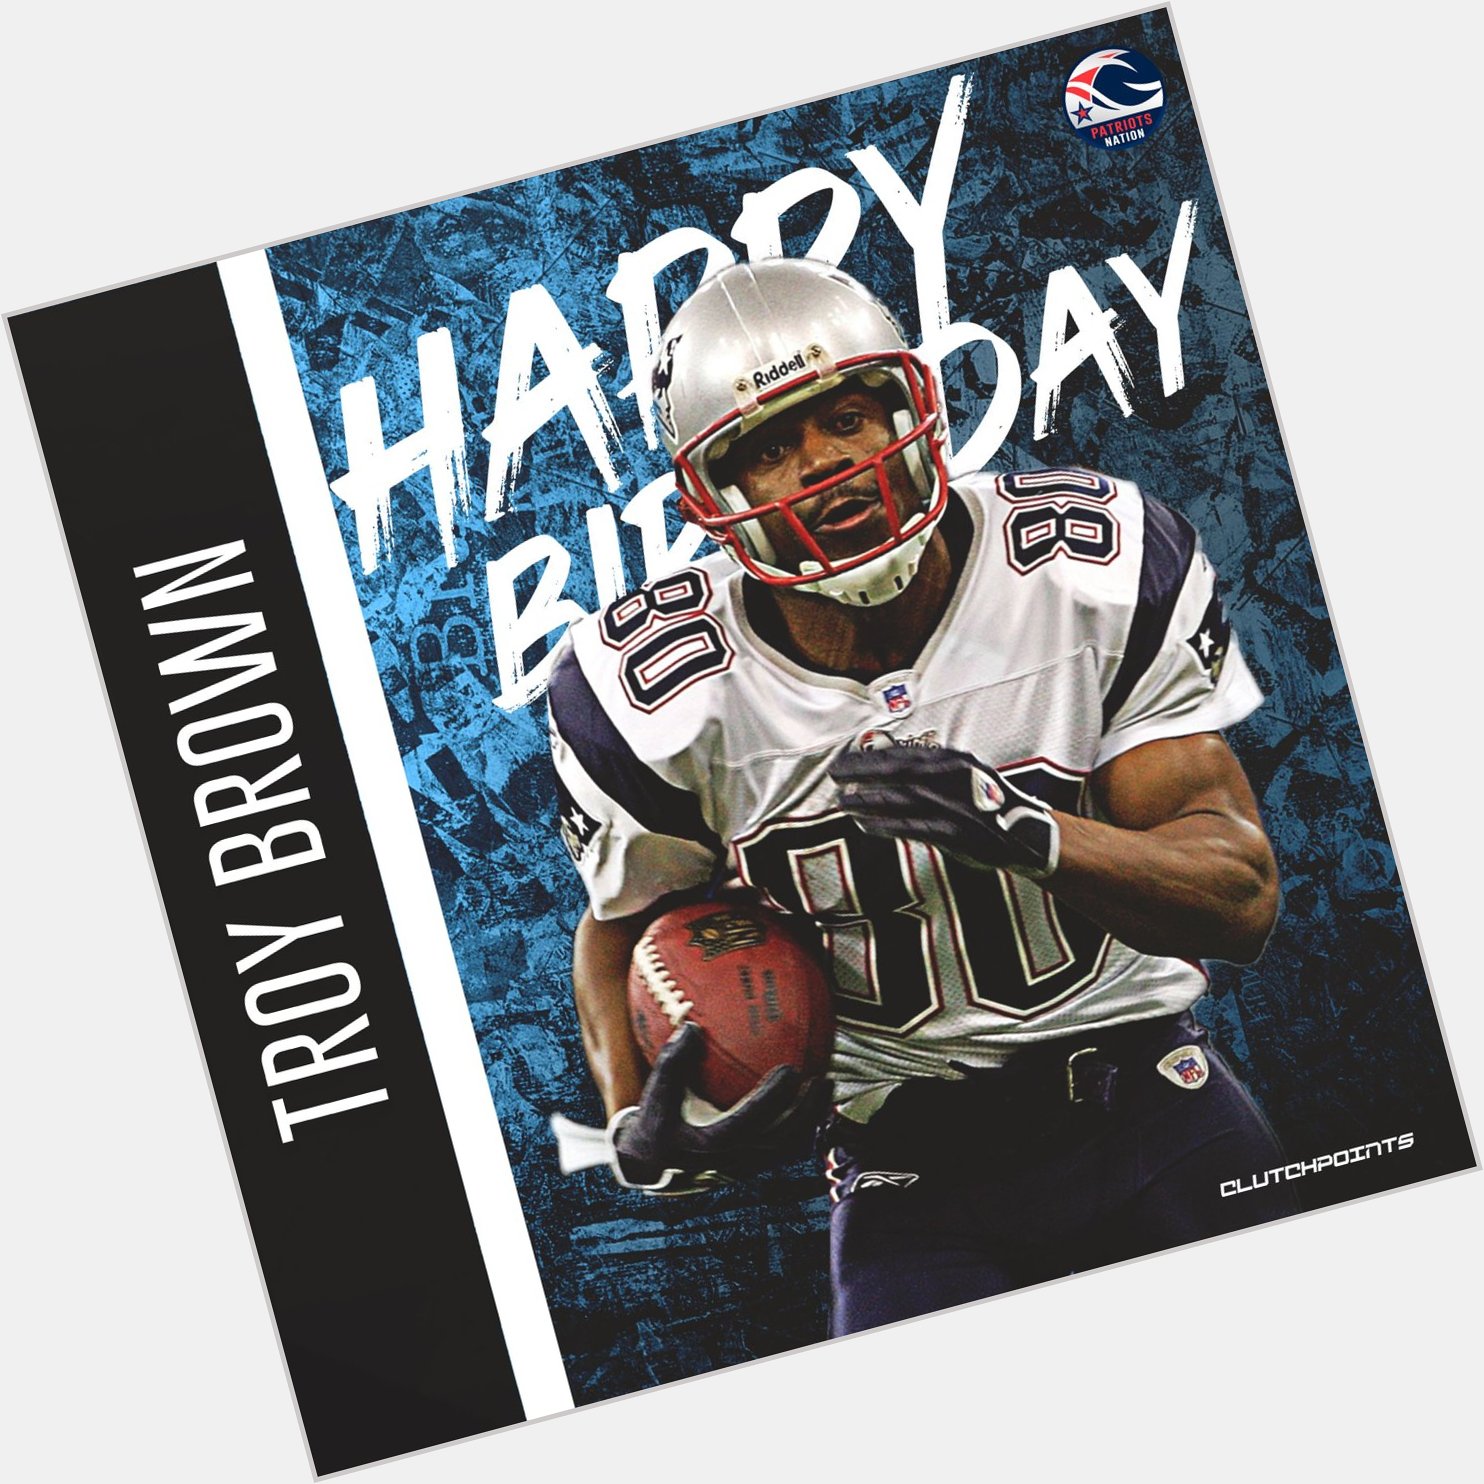 Let us all greet our 3-time Super Bowl Champion, Troy Brown a happy 50th birthday!  